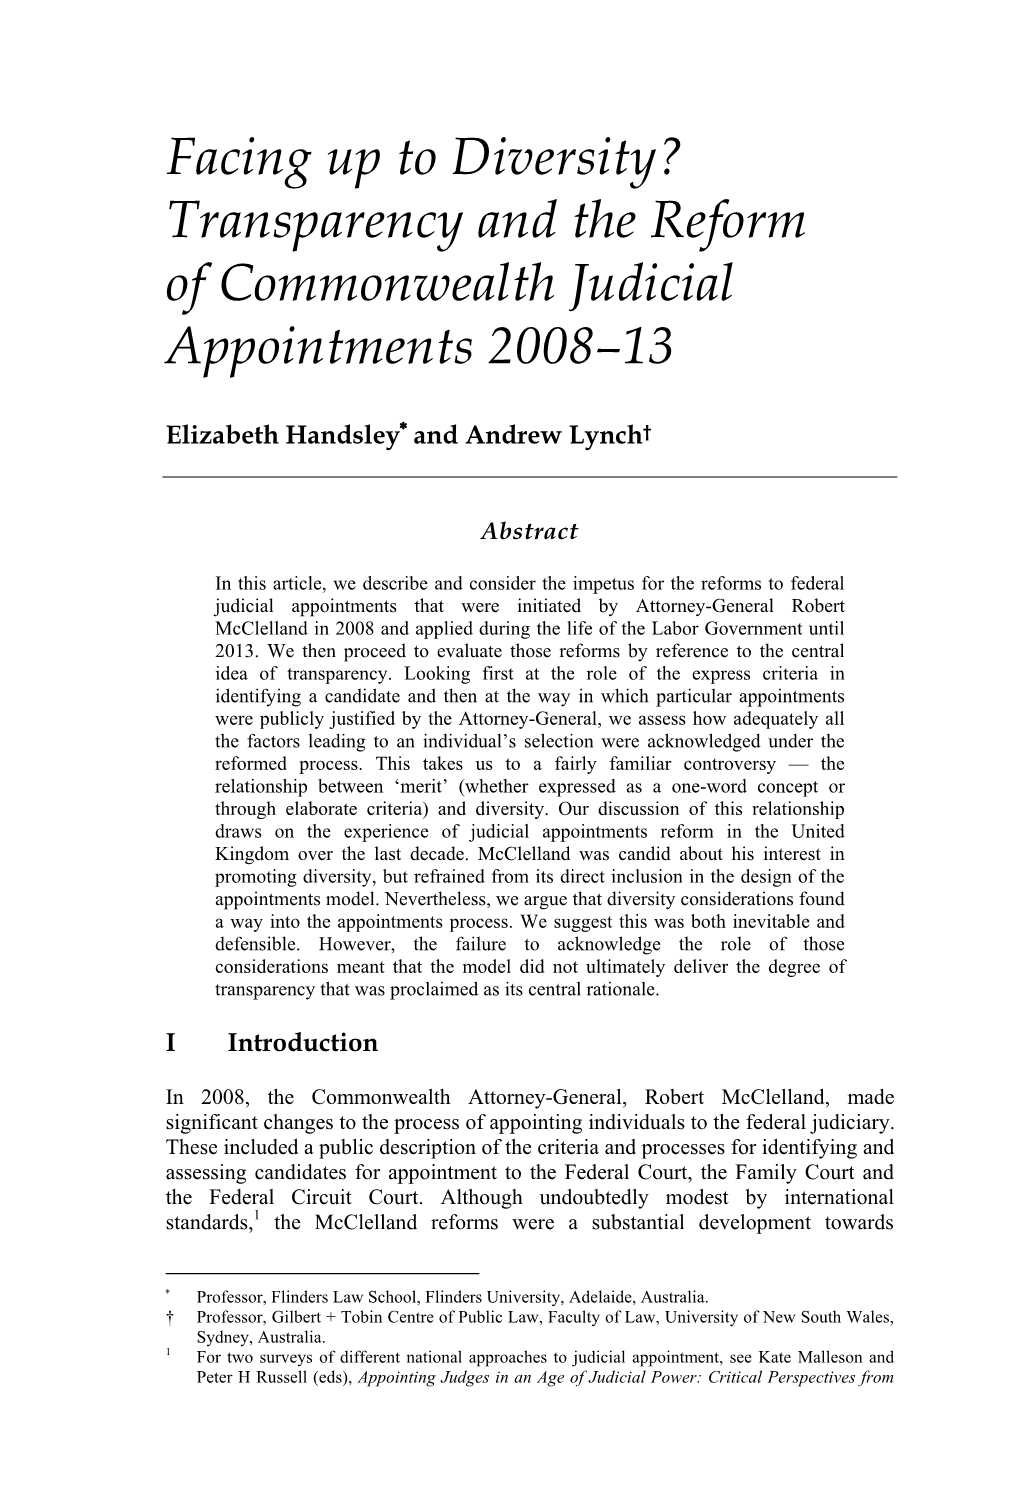 Transparency and the Reform of Commonwealth Judicial Appointments 2008–13